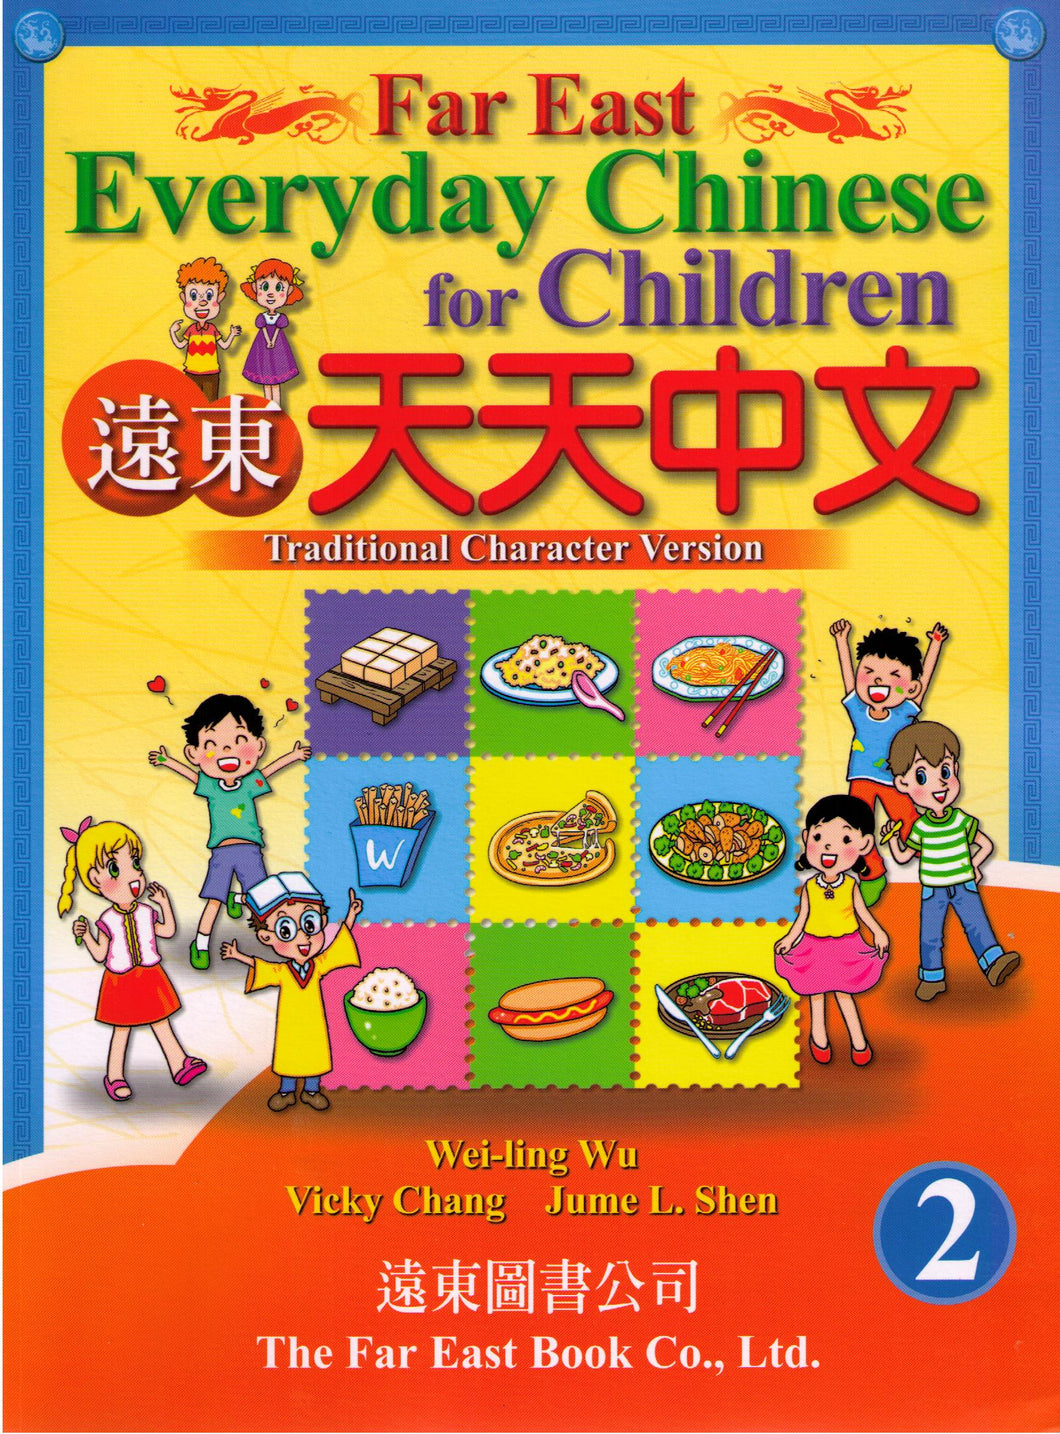 Far East Everyday Chinese for Children Level 2-Textbook,Traditional 遠東天天中文